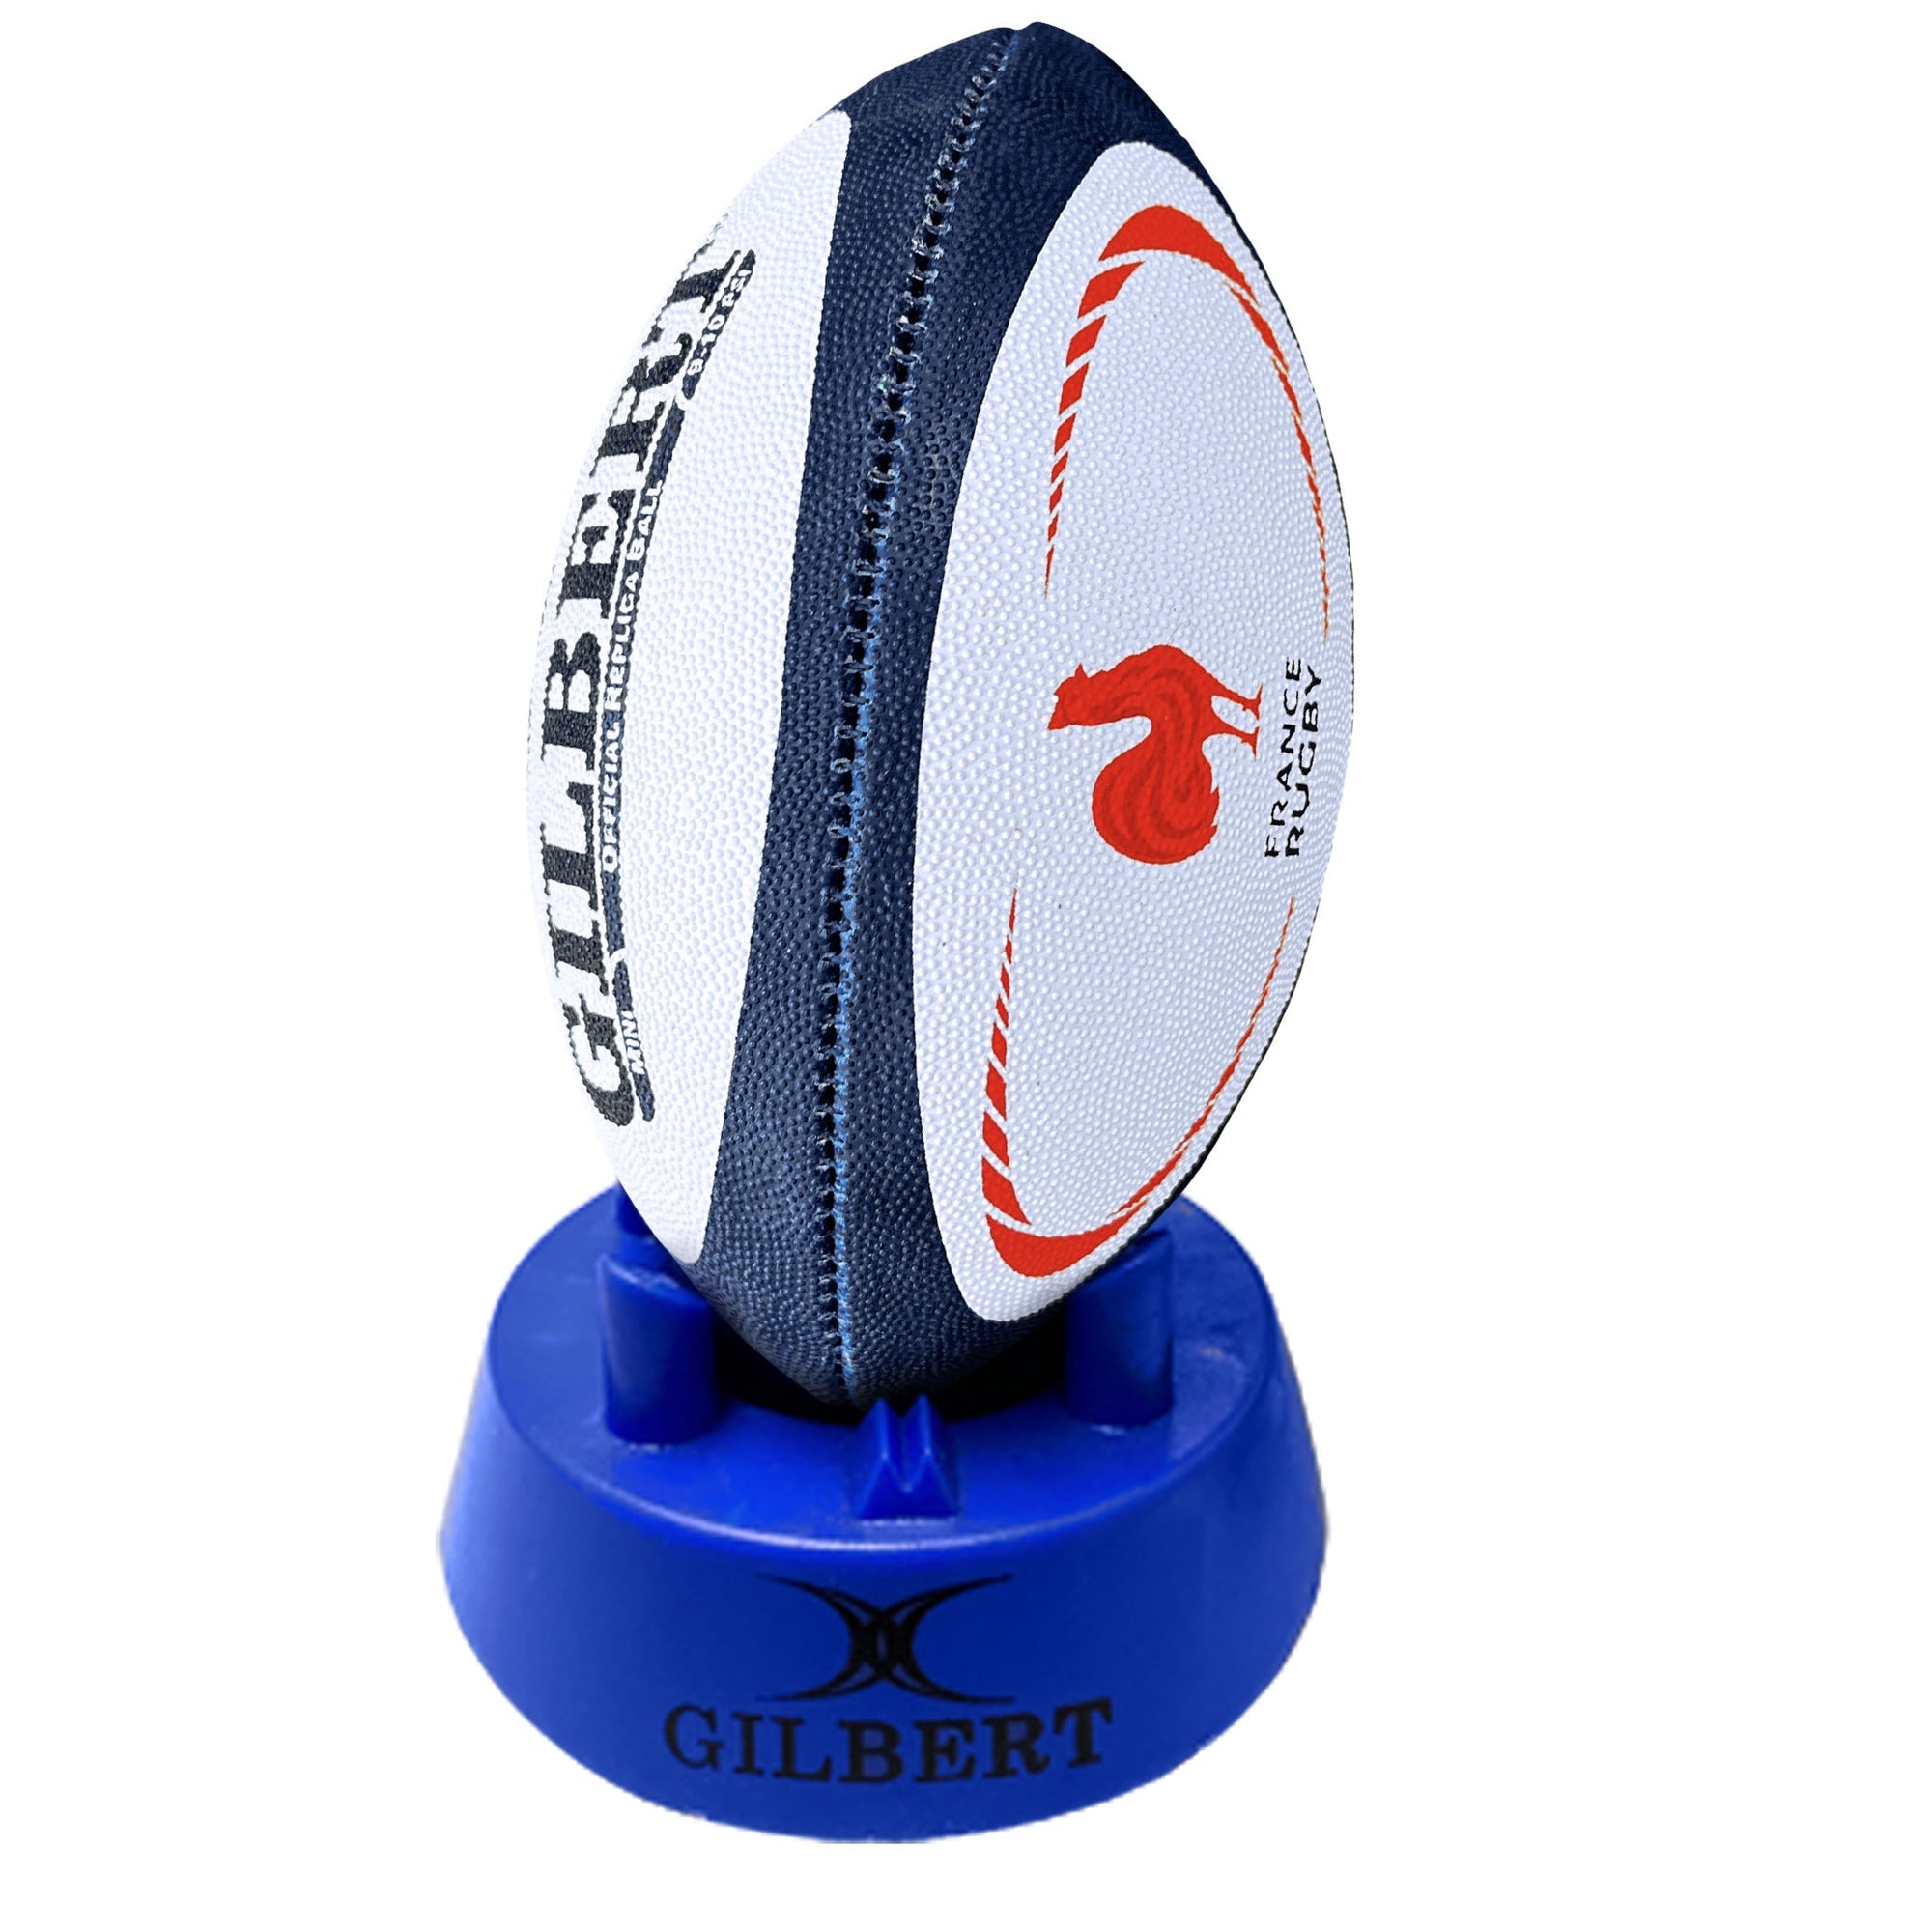 Rugby Imports Gilbert France Replica Mini Rugby Ball